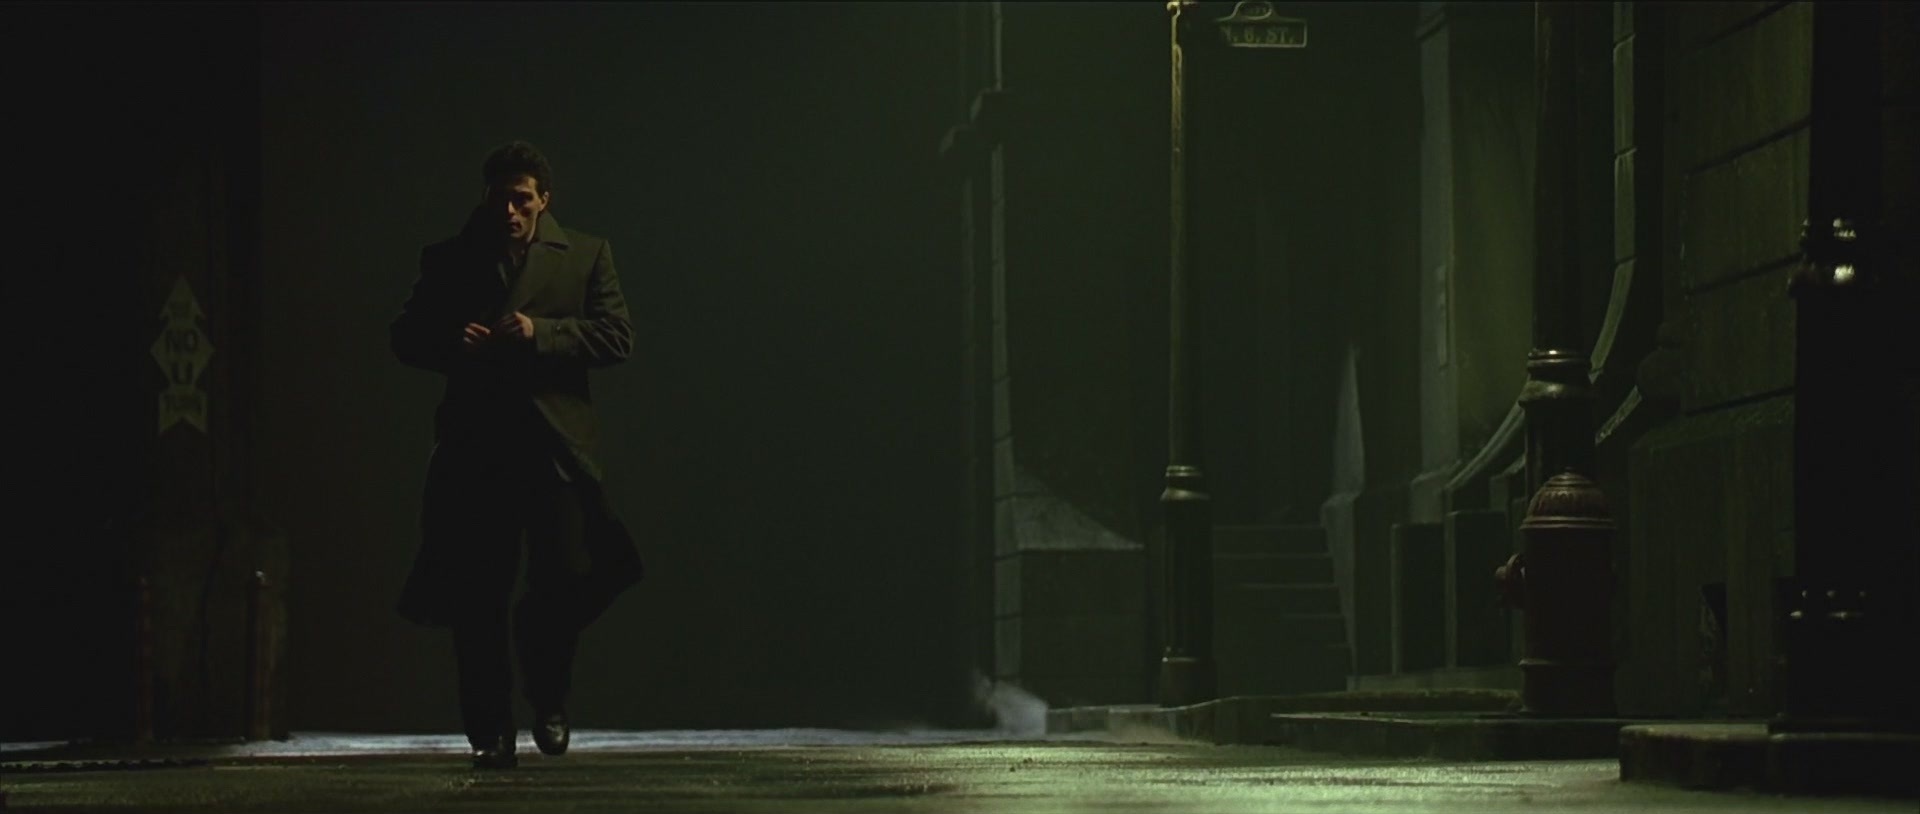 Dark City Image HD Wallpaper And Background Photos